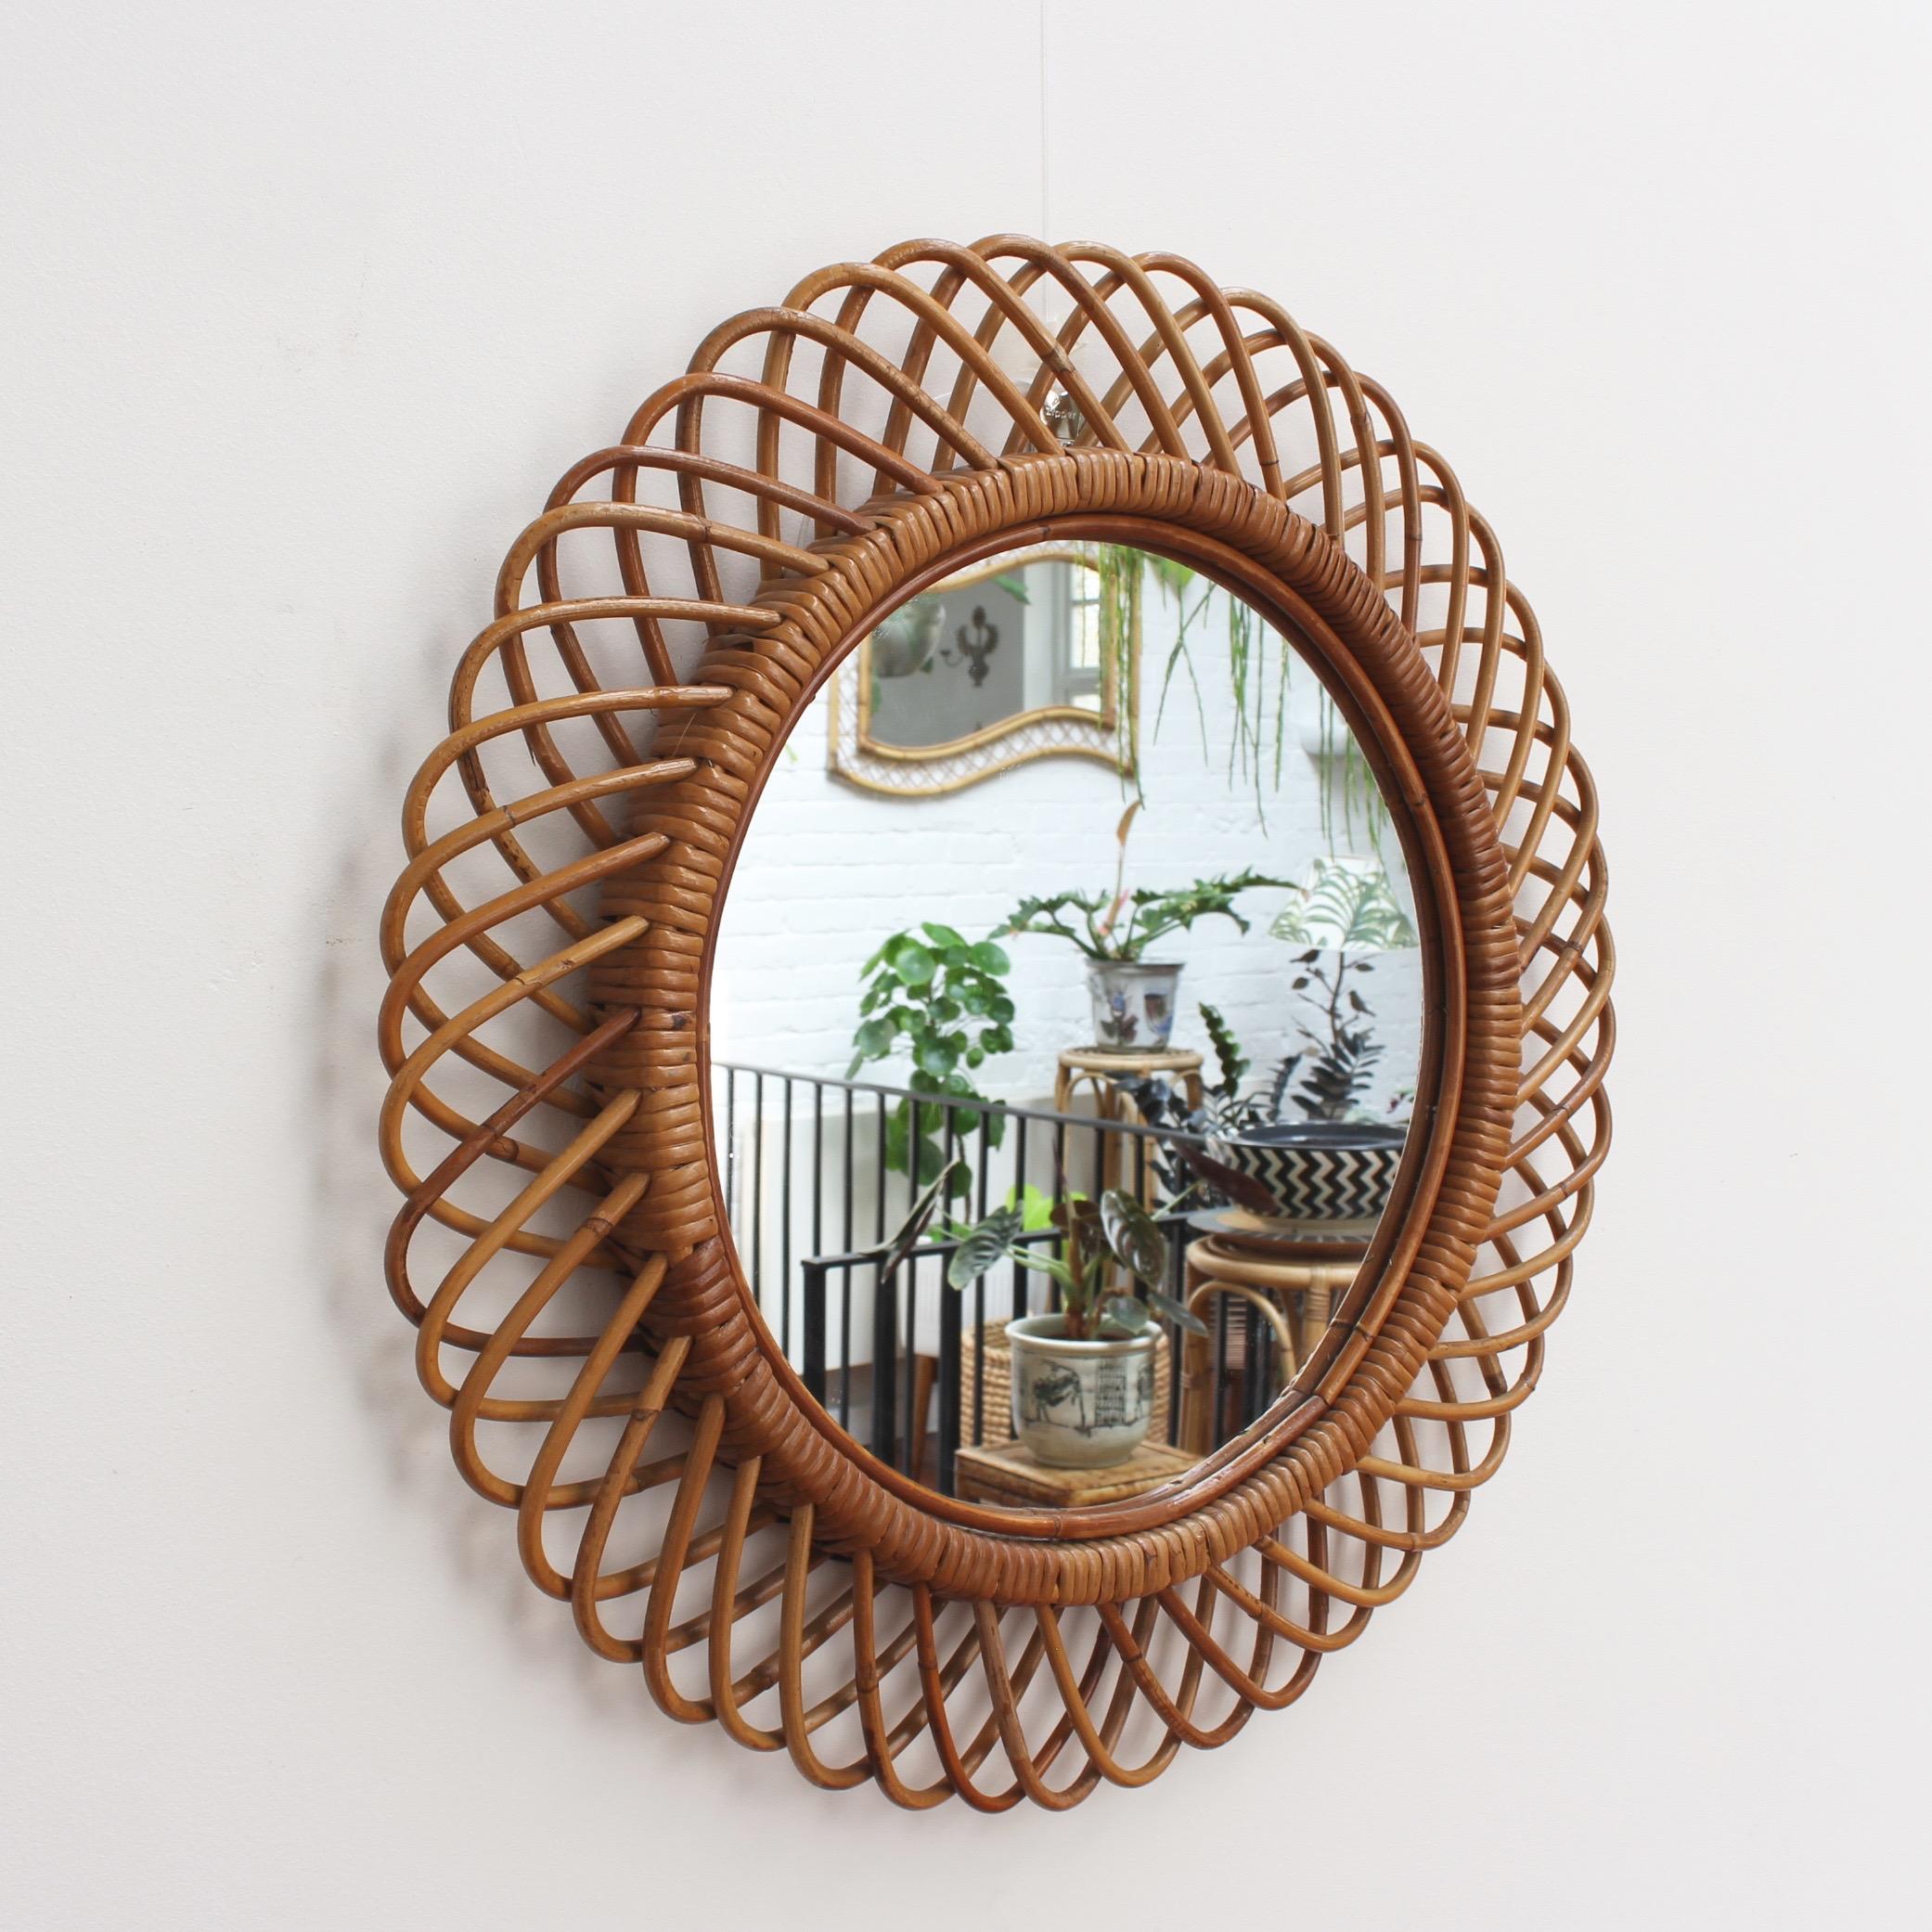 Italian rattan round wall mirror (circa 1960s) in the style of Franco Albini. This is a mirror with substantial depth and a complex weave of rattan. There is a beautiful patina on the rattan and it is in good vintage condition consistent with its